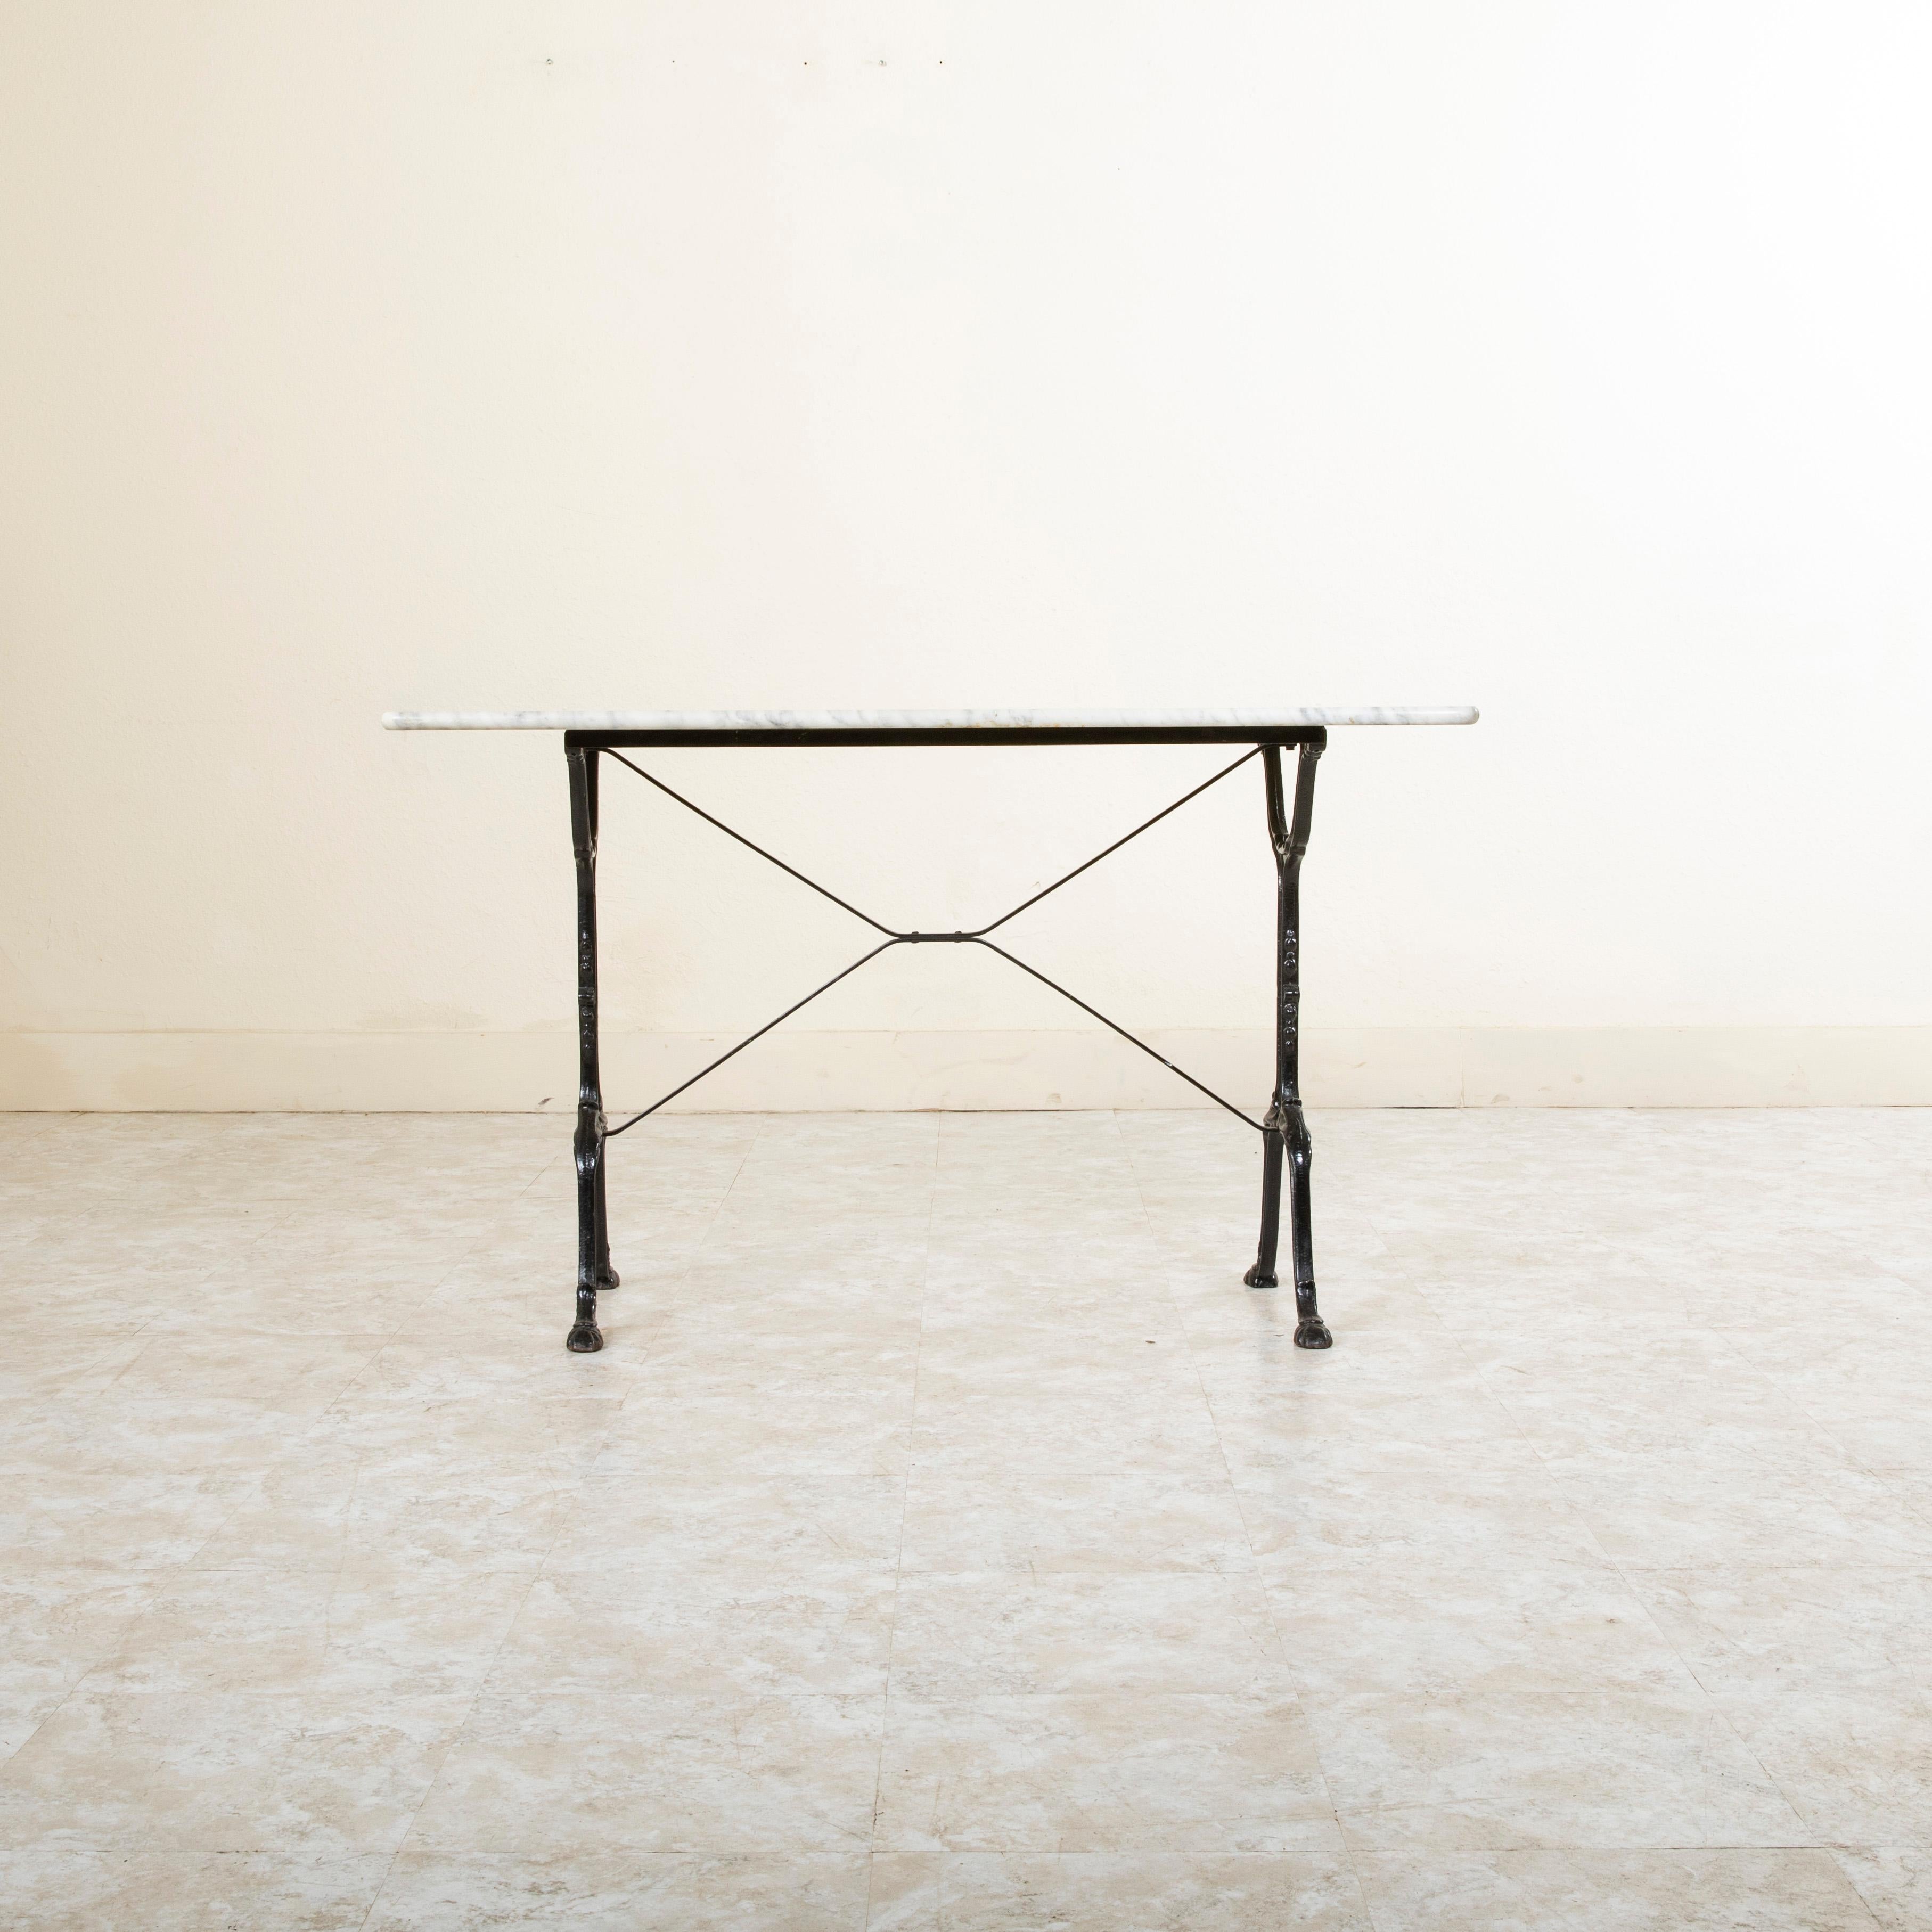 Originally used in a French brasserie during the early twentieth century, this long cast iron bistro table or cafe table features a solid white marble top with grey veining. Scrolled iron legs support the top and are joined by an X-stretcher that